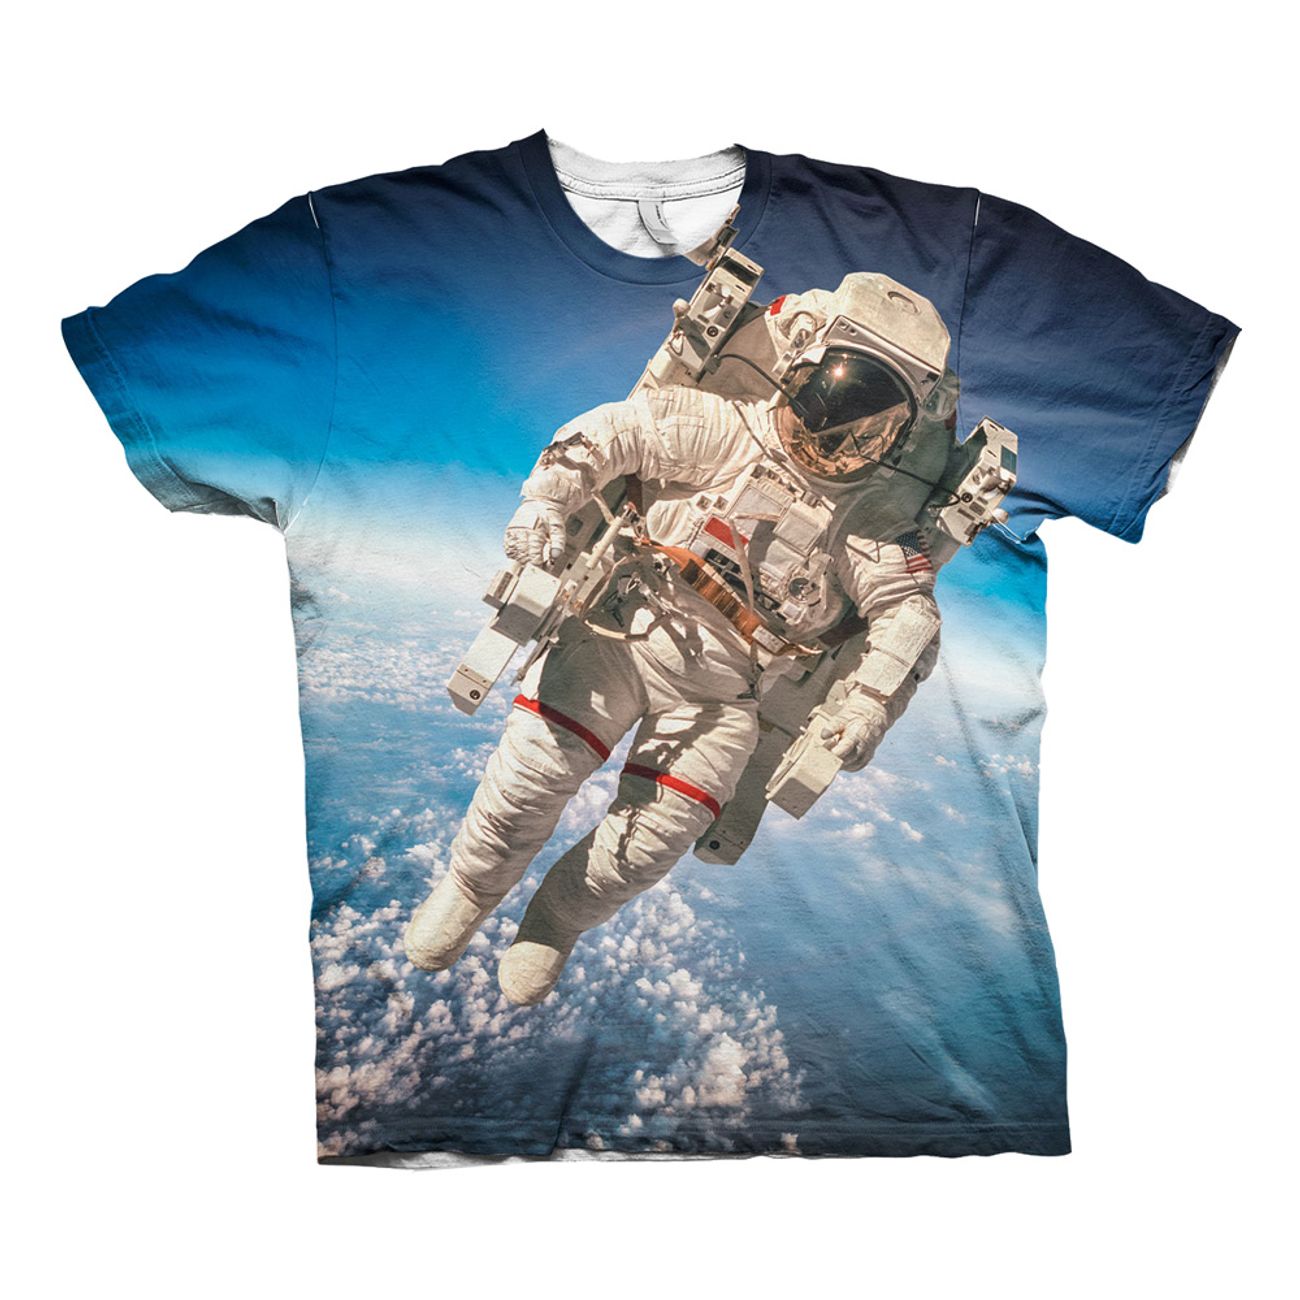 space-allover-t-shirt-1